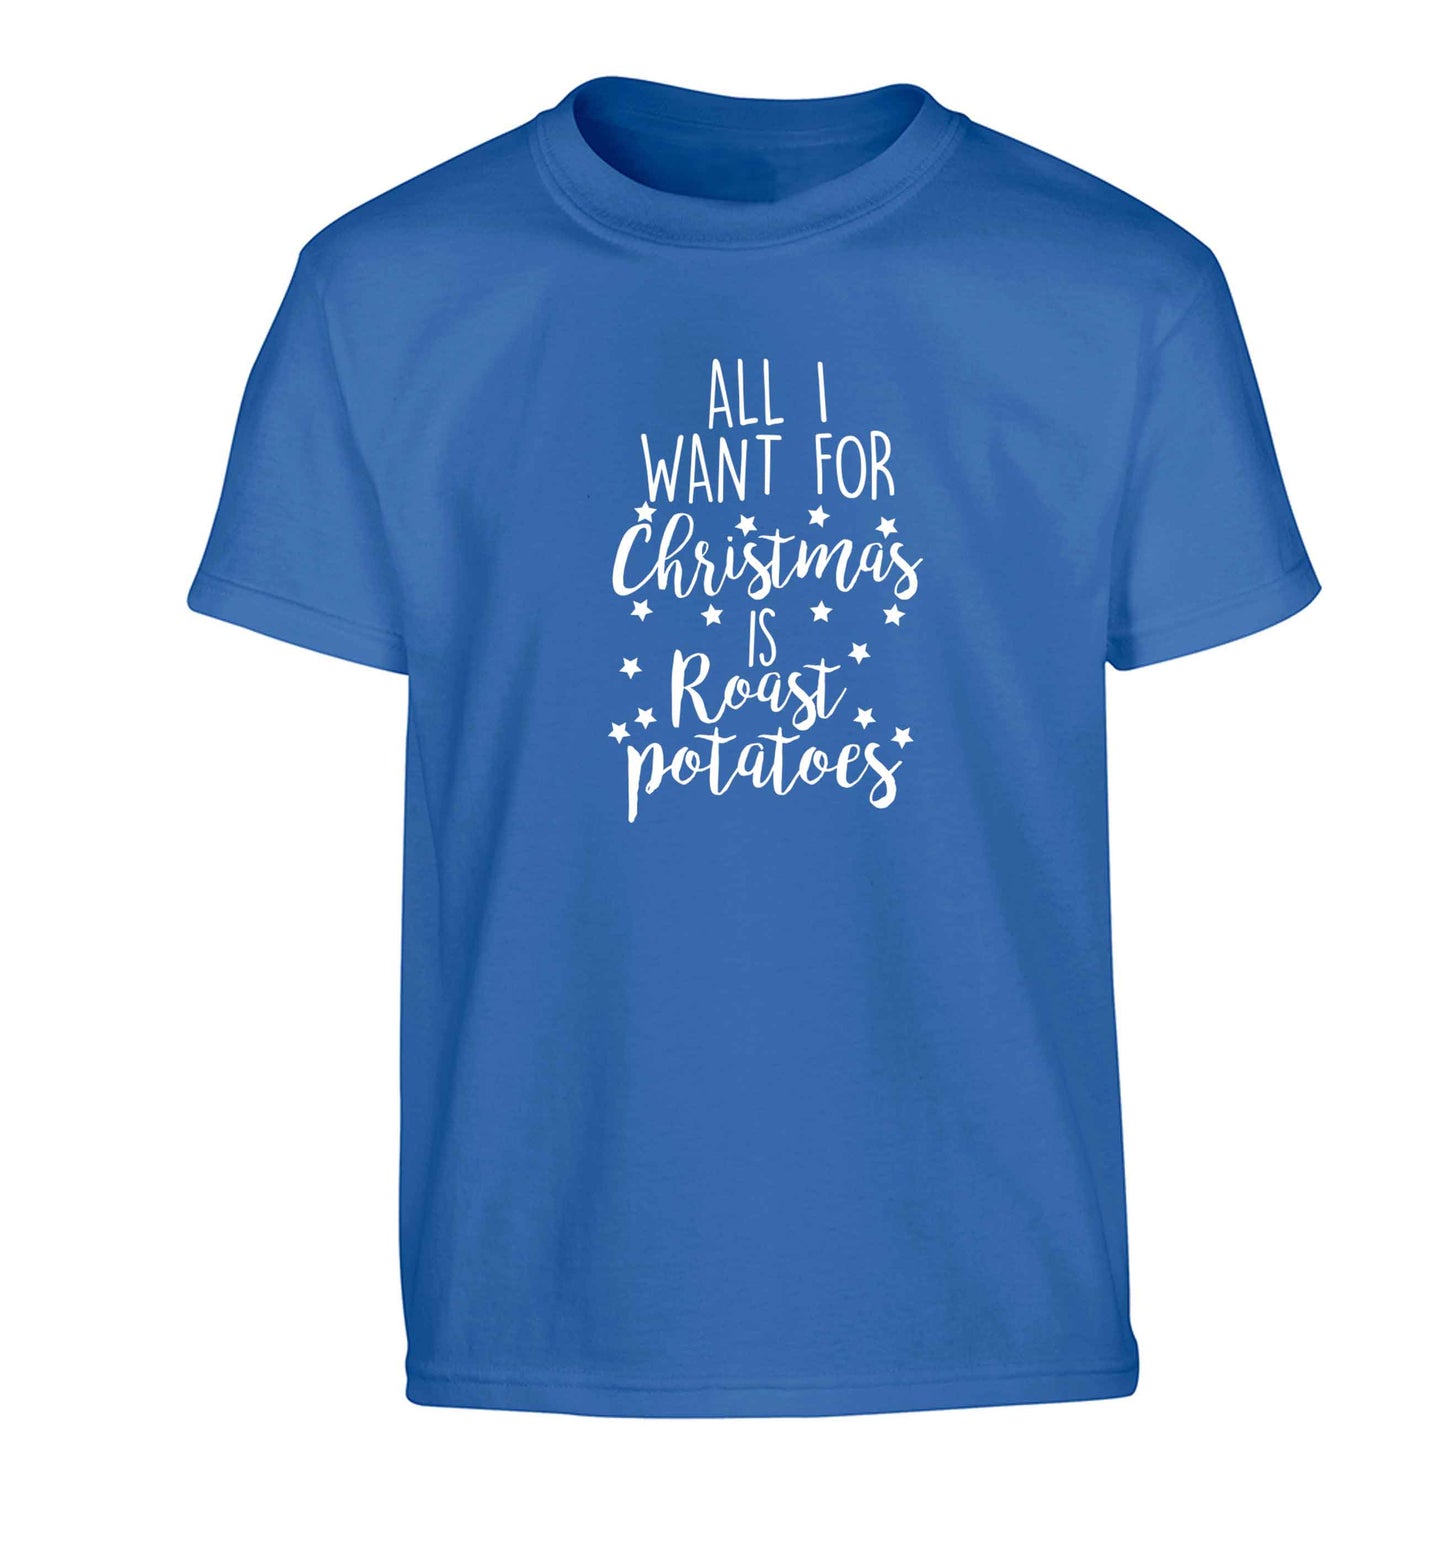 All I want for Christmas is roast potatoes Children's blue Tshirt 12-13 Years